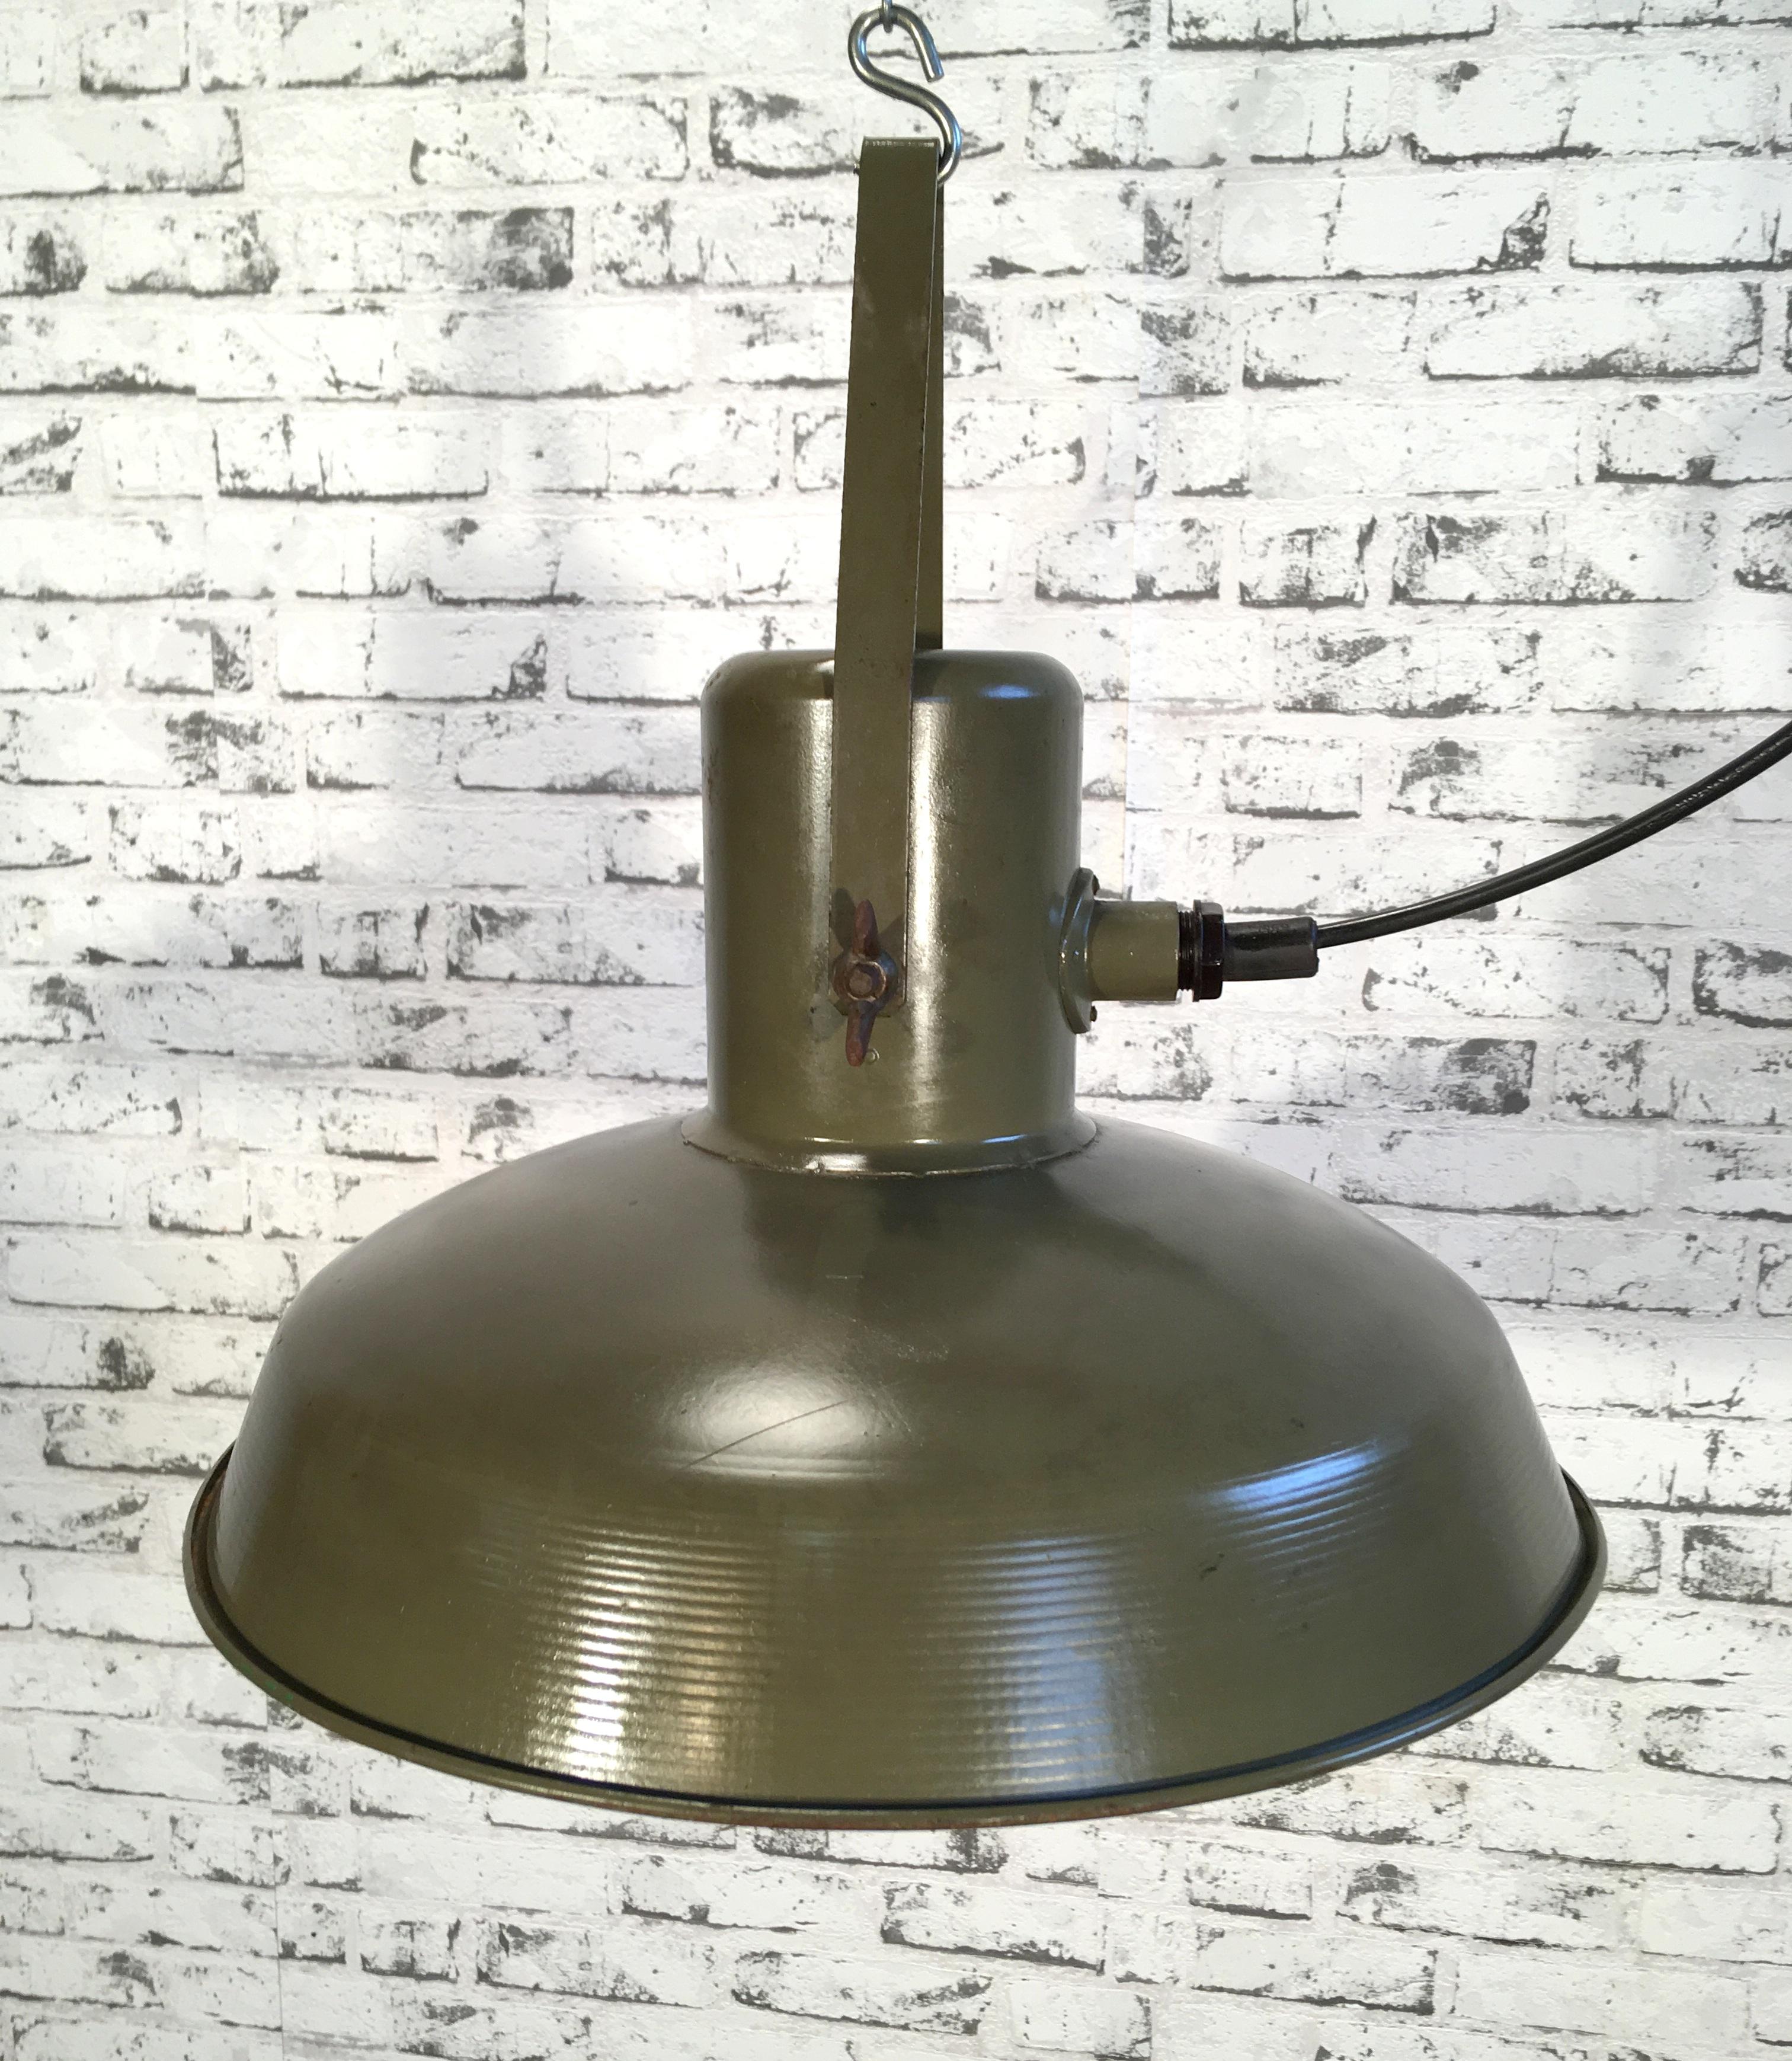 This pendant lamp was made and manufactured in the 1960s for use in the army. It is made from green metal. Lamp is fully functional and holds standard E27 bulbs. Weight of the lamp is 2 kg.